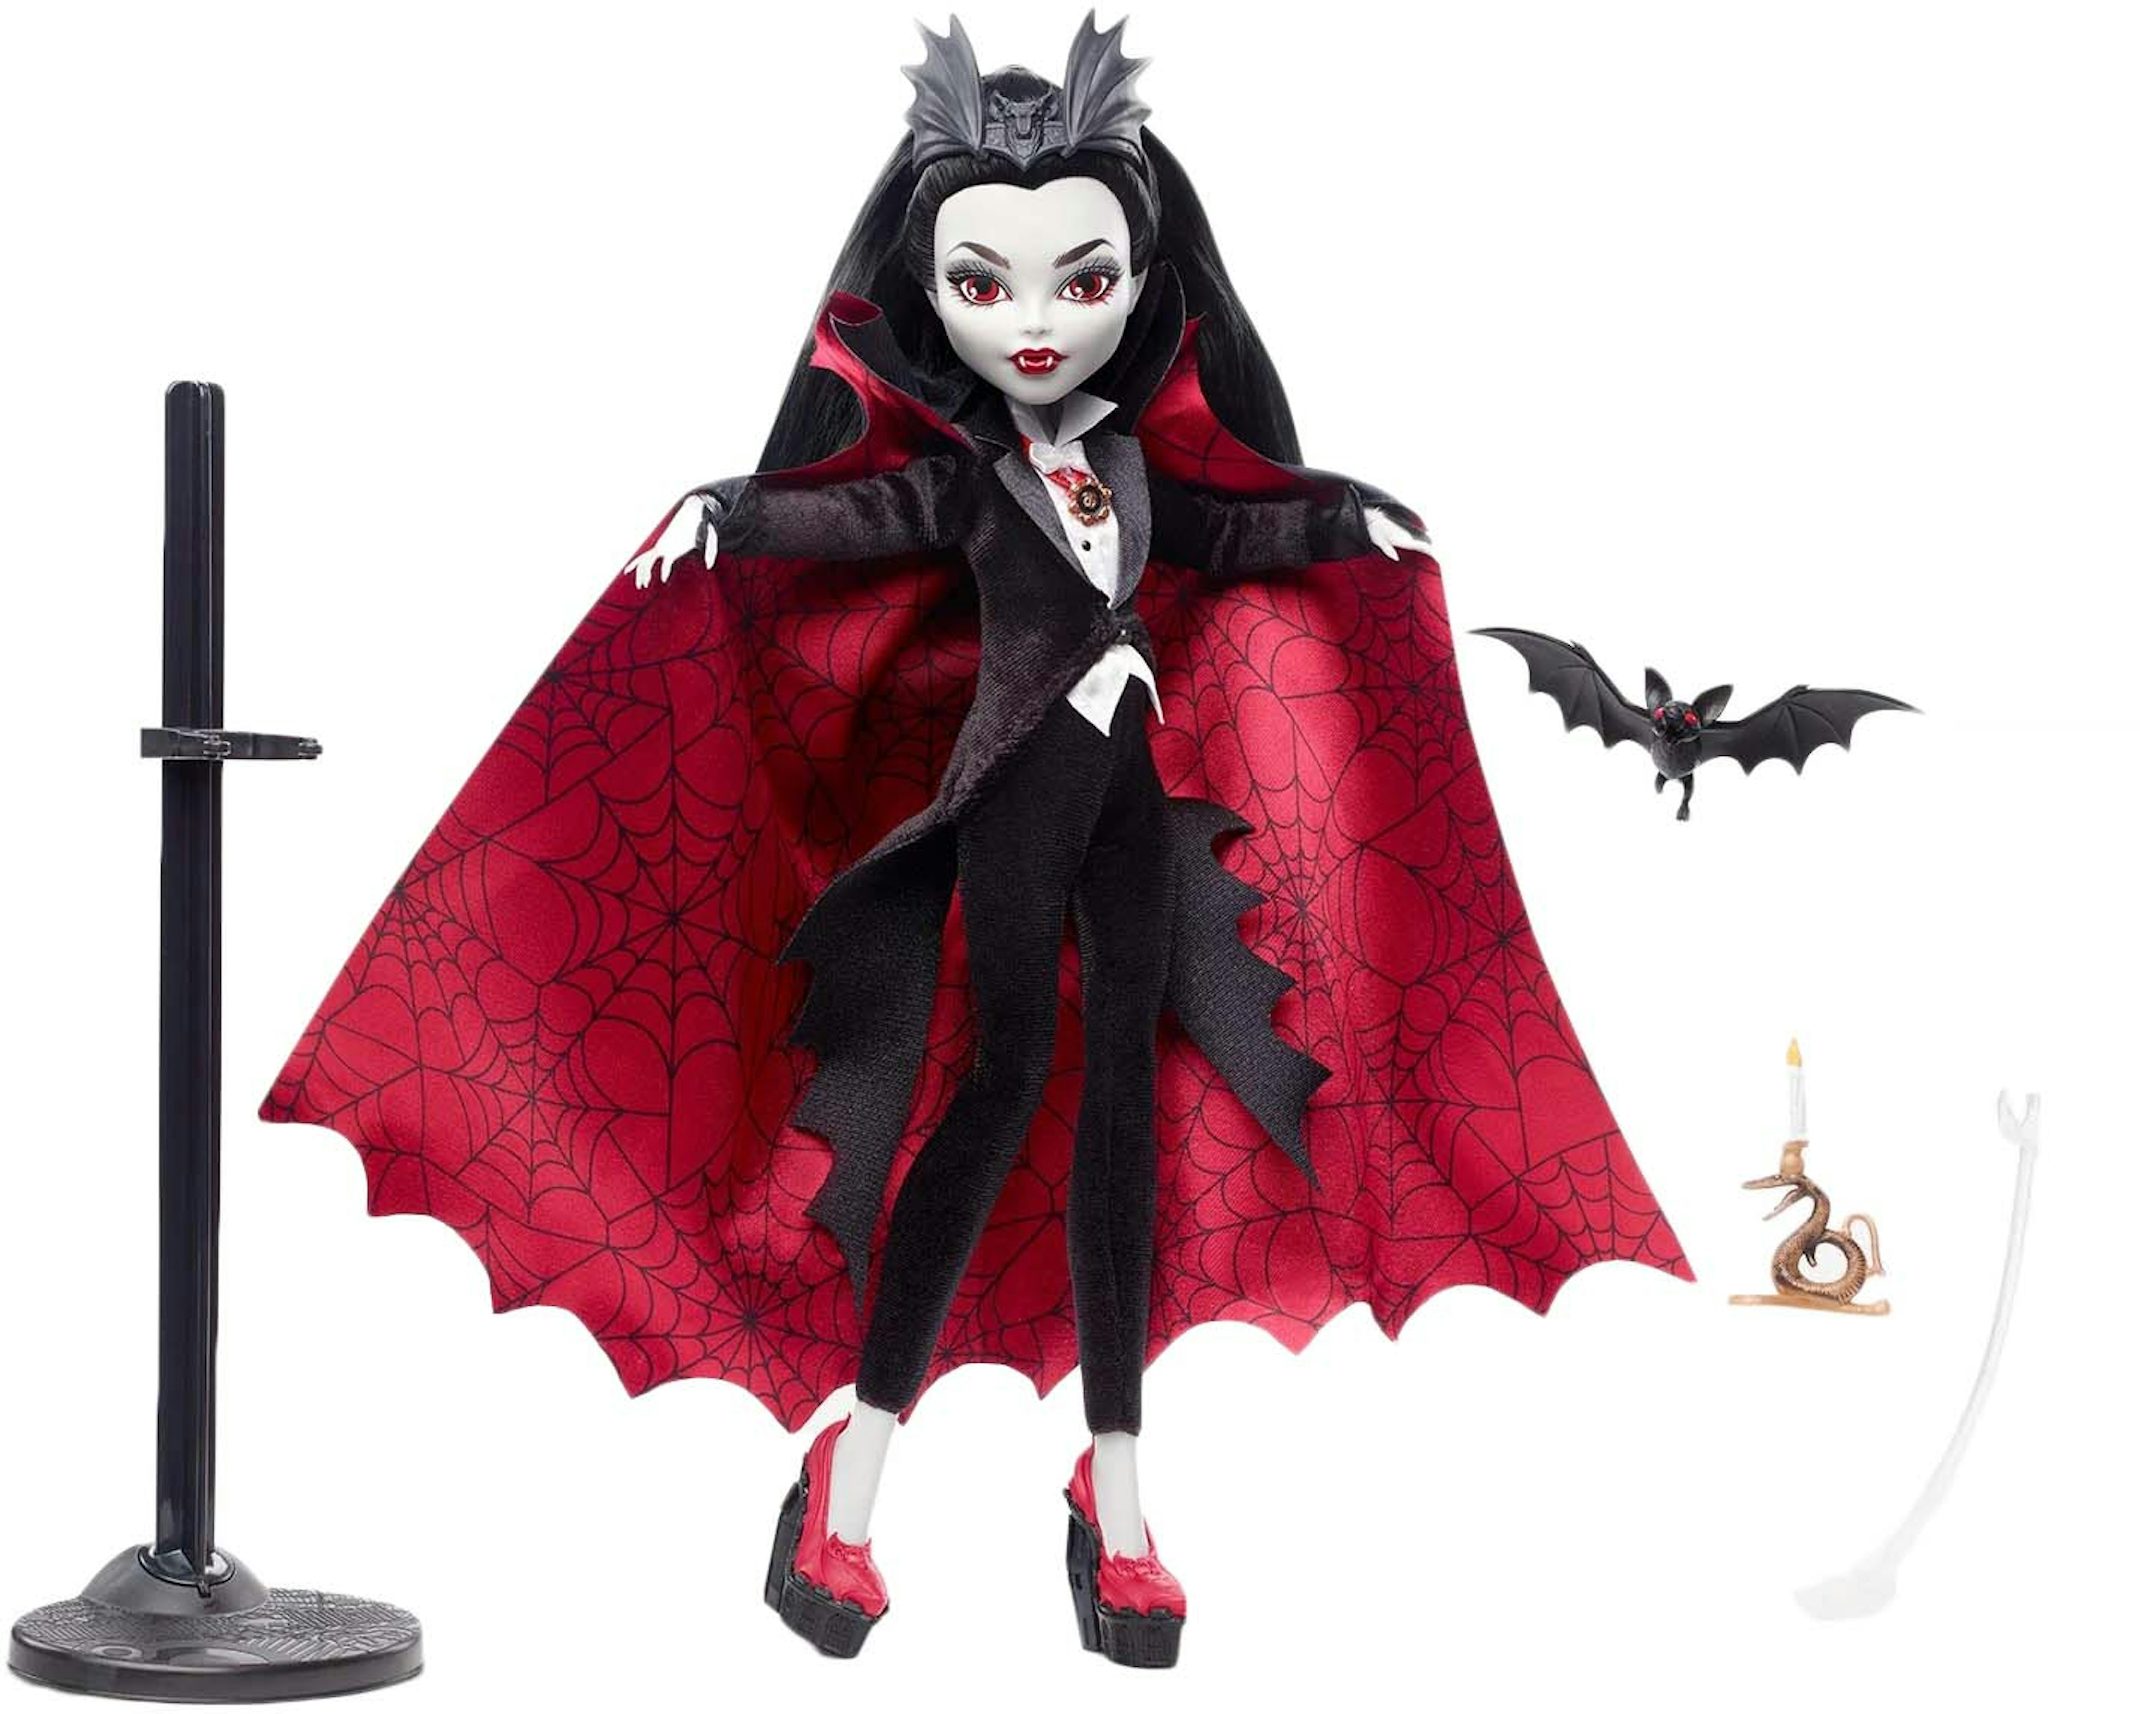 Mattel Monster High Haunt Couture Draculaura Doll - SS22 - US